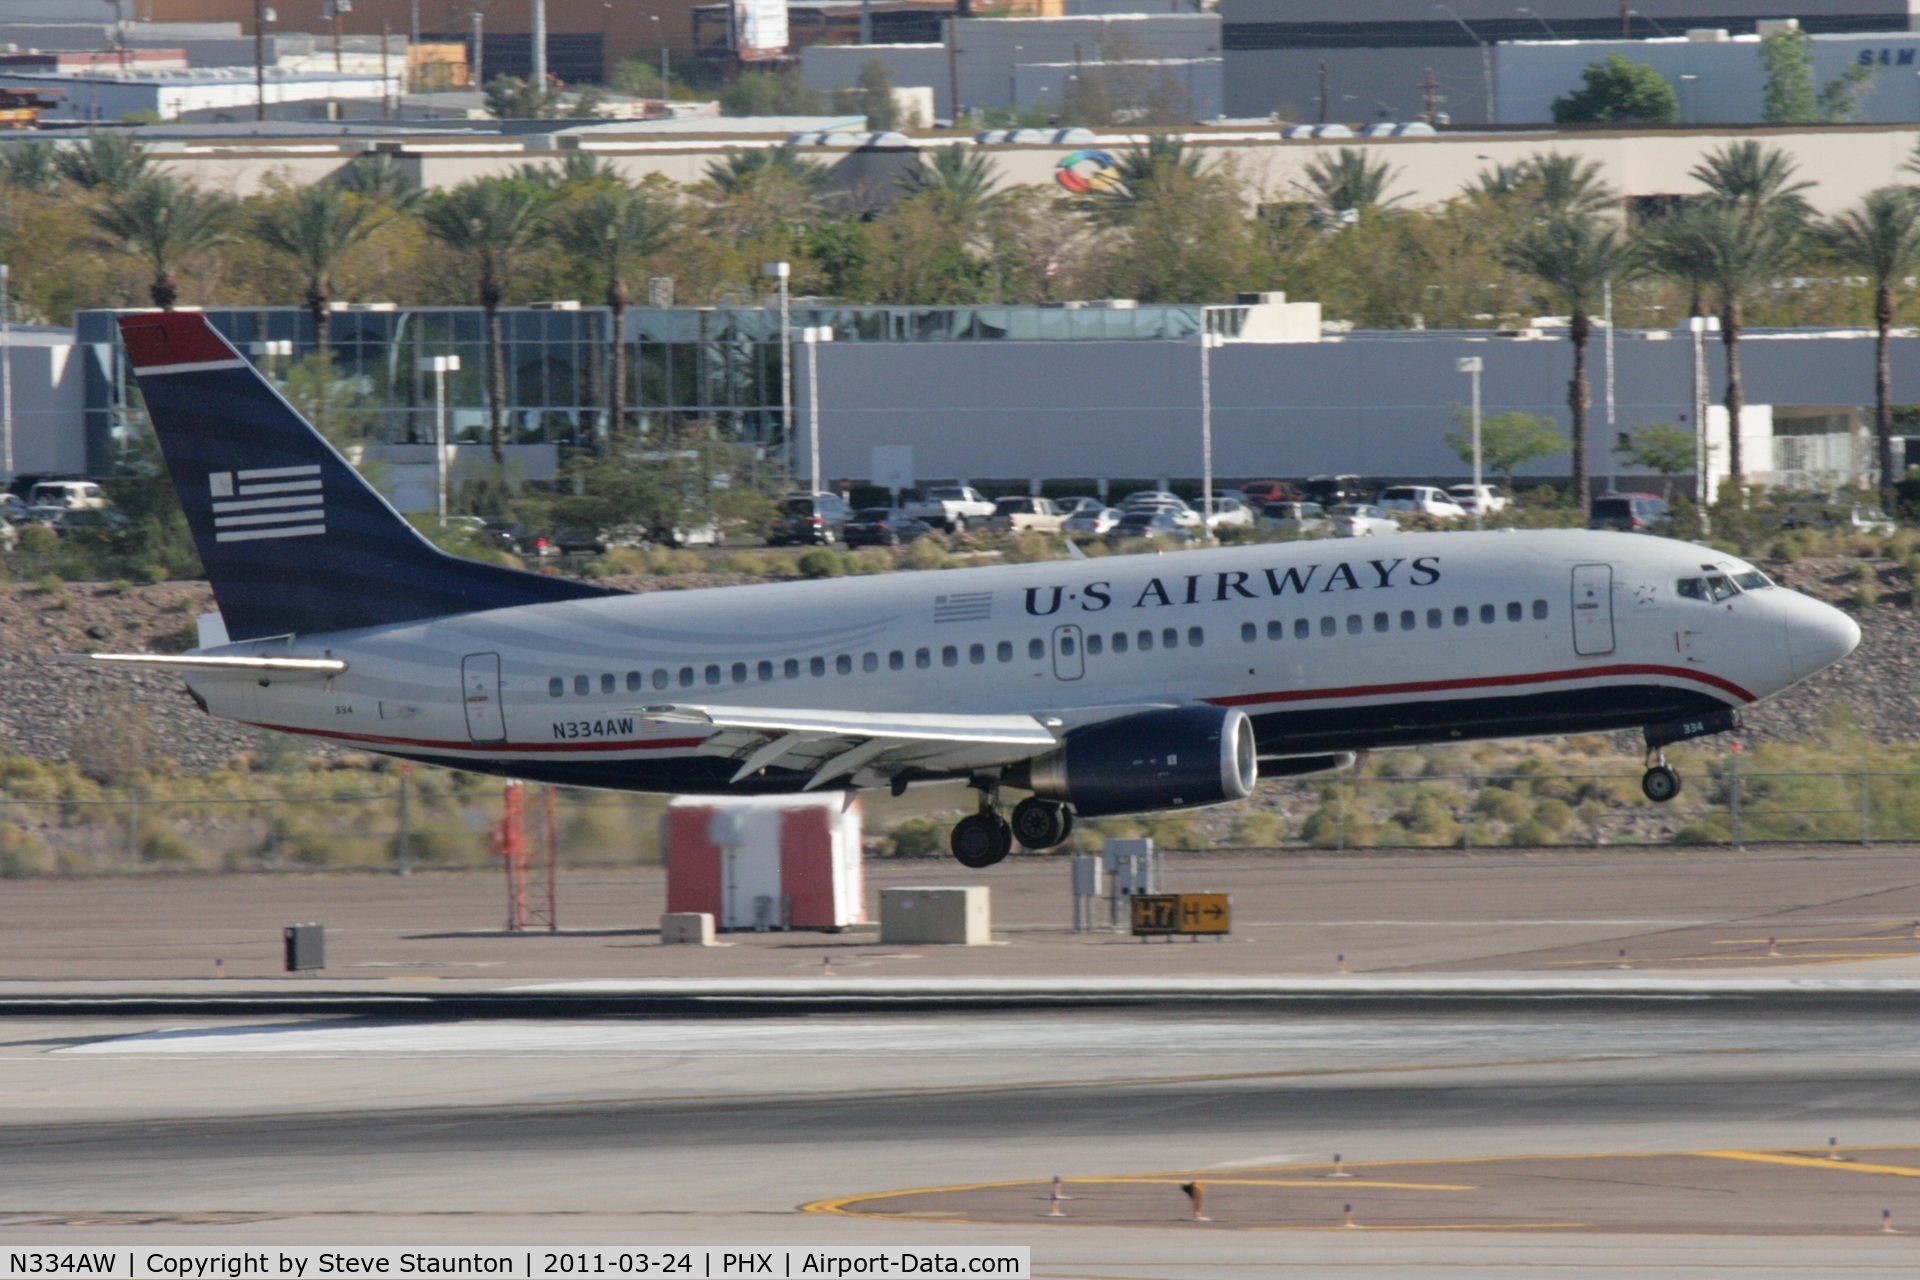 N334AW, 1987 Boeing 737-3Y0 C/N 23748, Taken at Phoenix Sky Harbor Airport, in March 2011 whilst on an Aeroprint Aviation tour